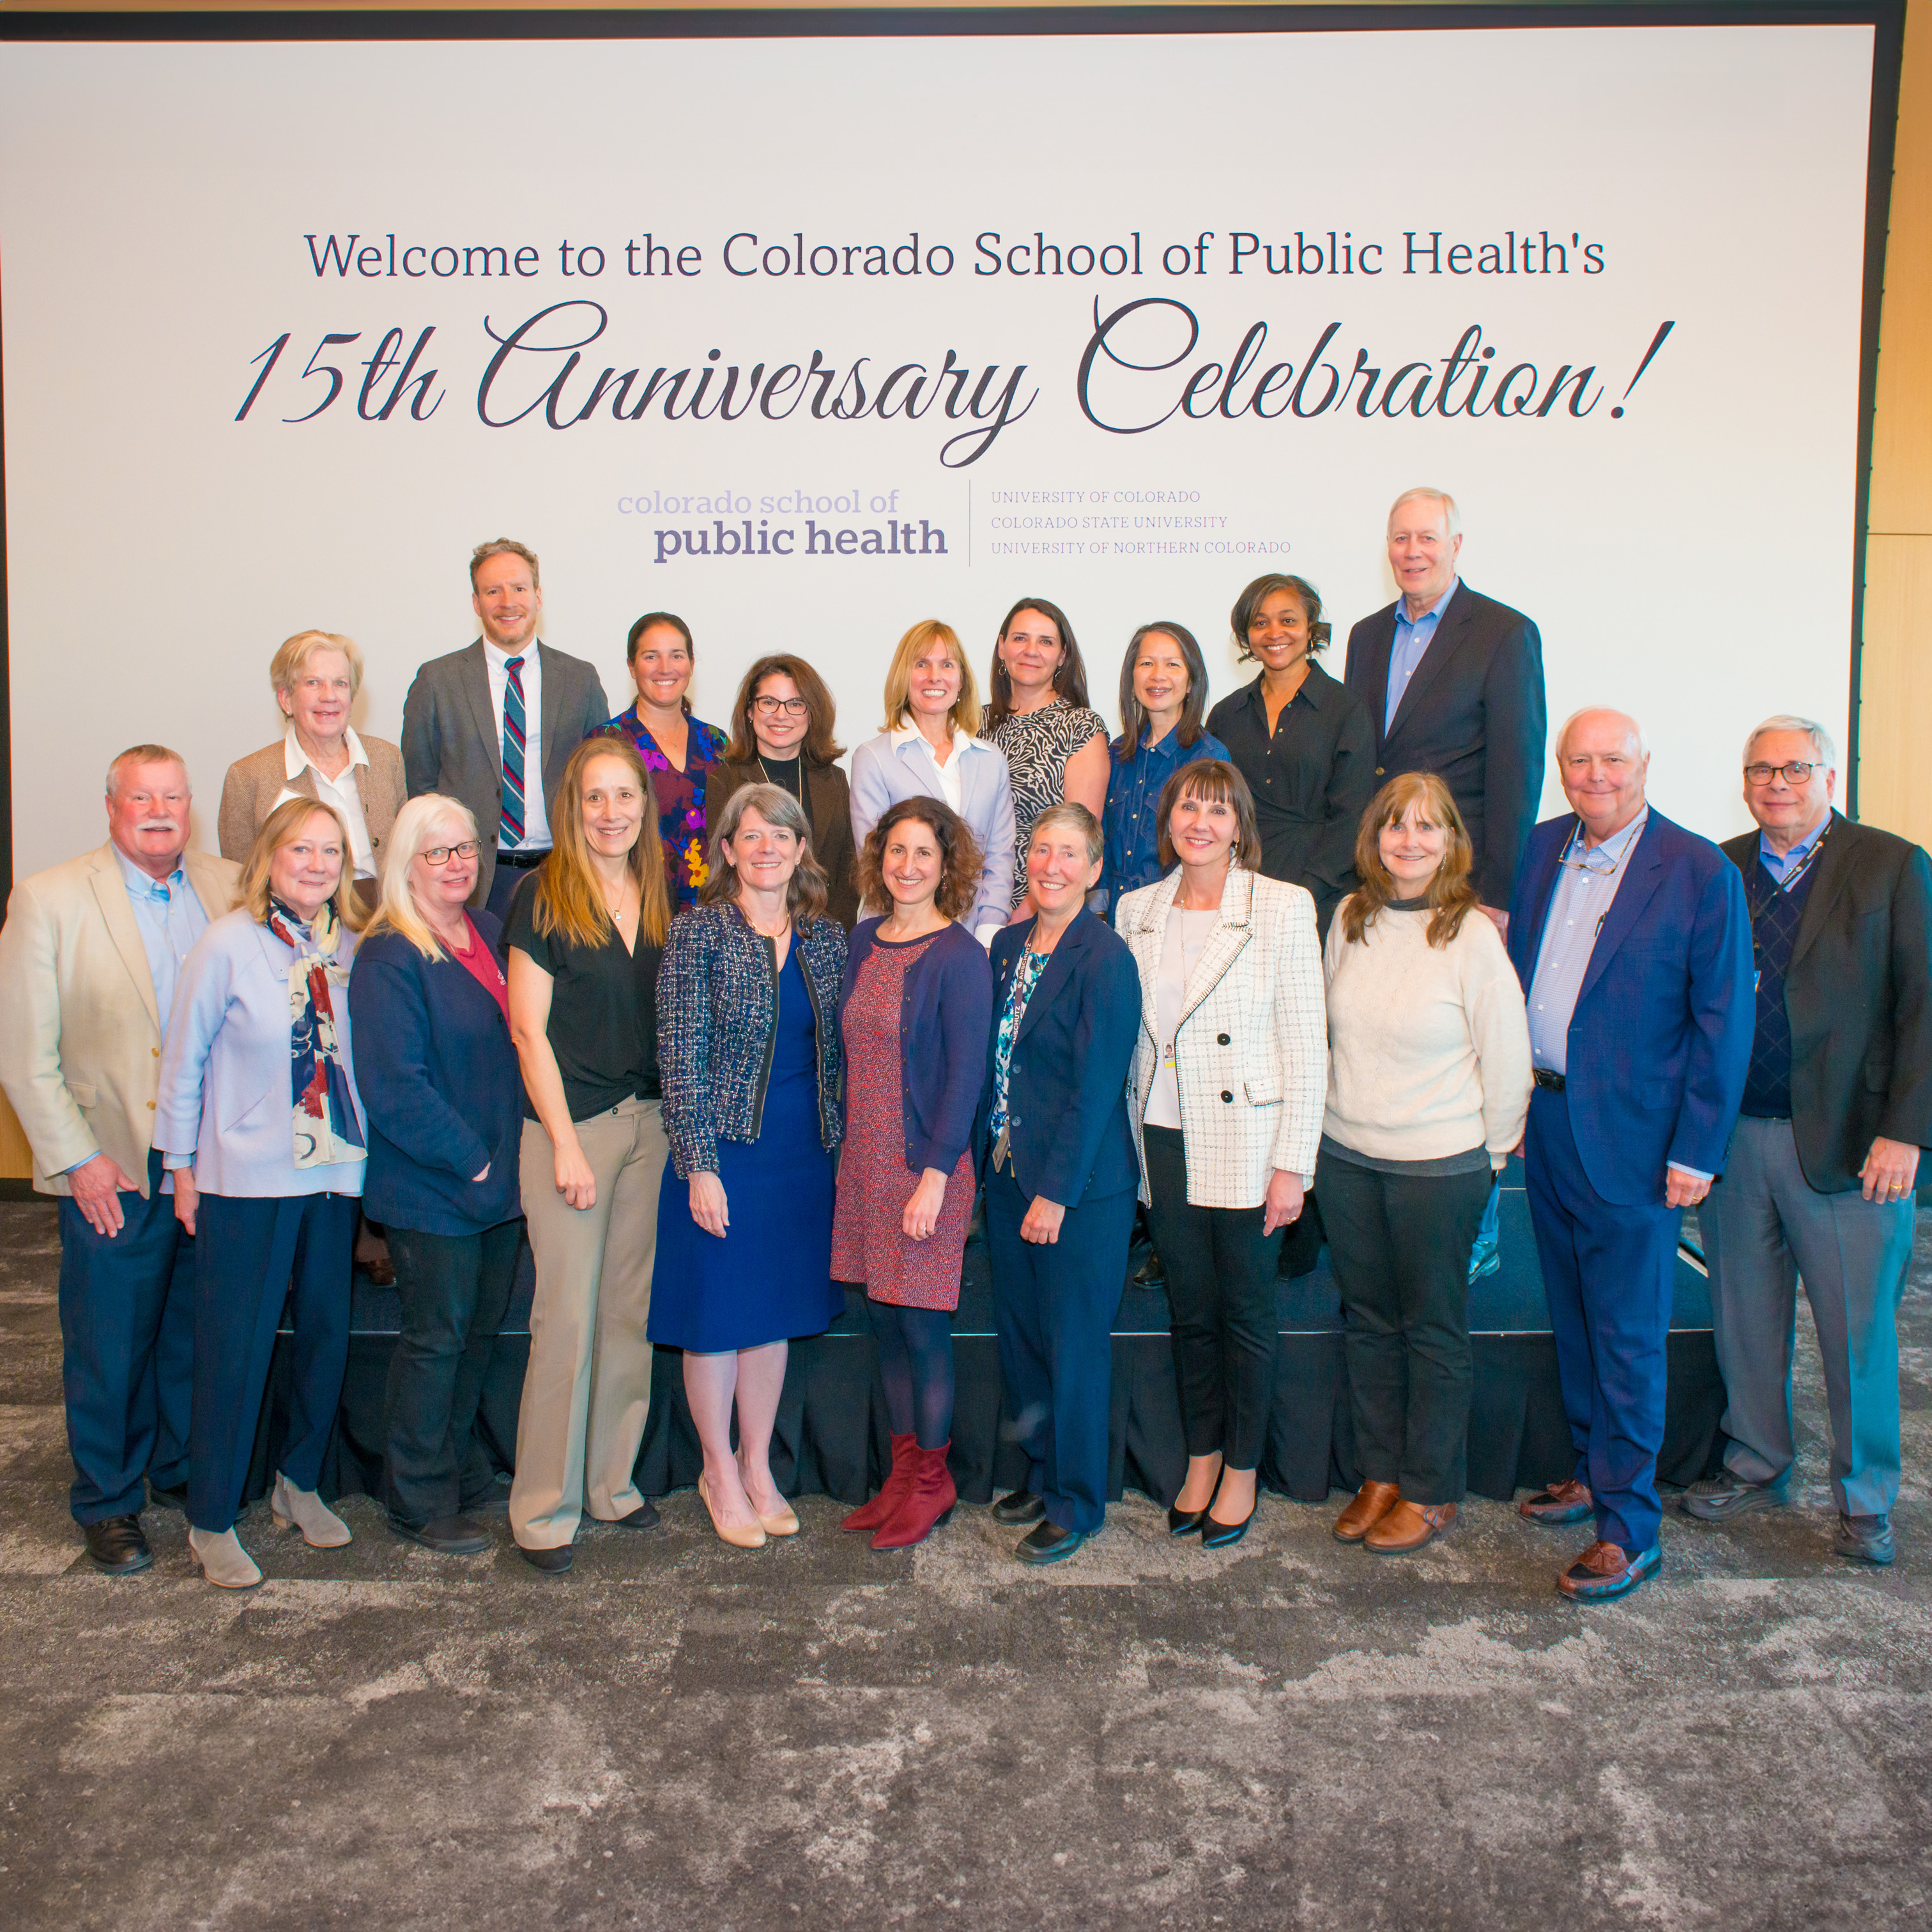 Group photo of attendees taken at the Colorado School of Public Health's 15th Anniversary Celebration.